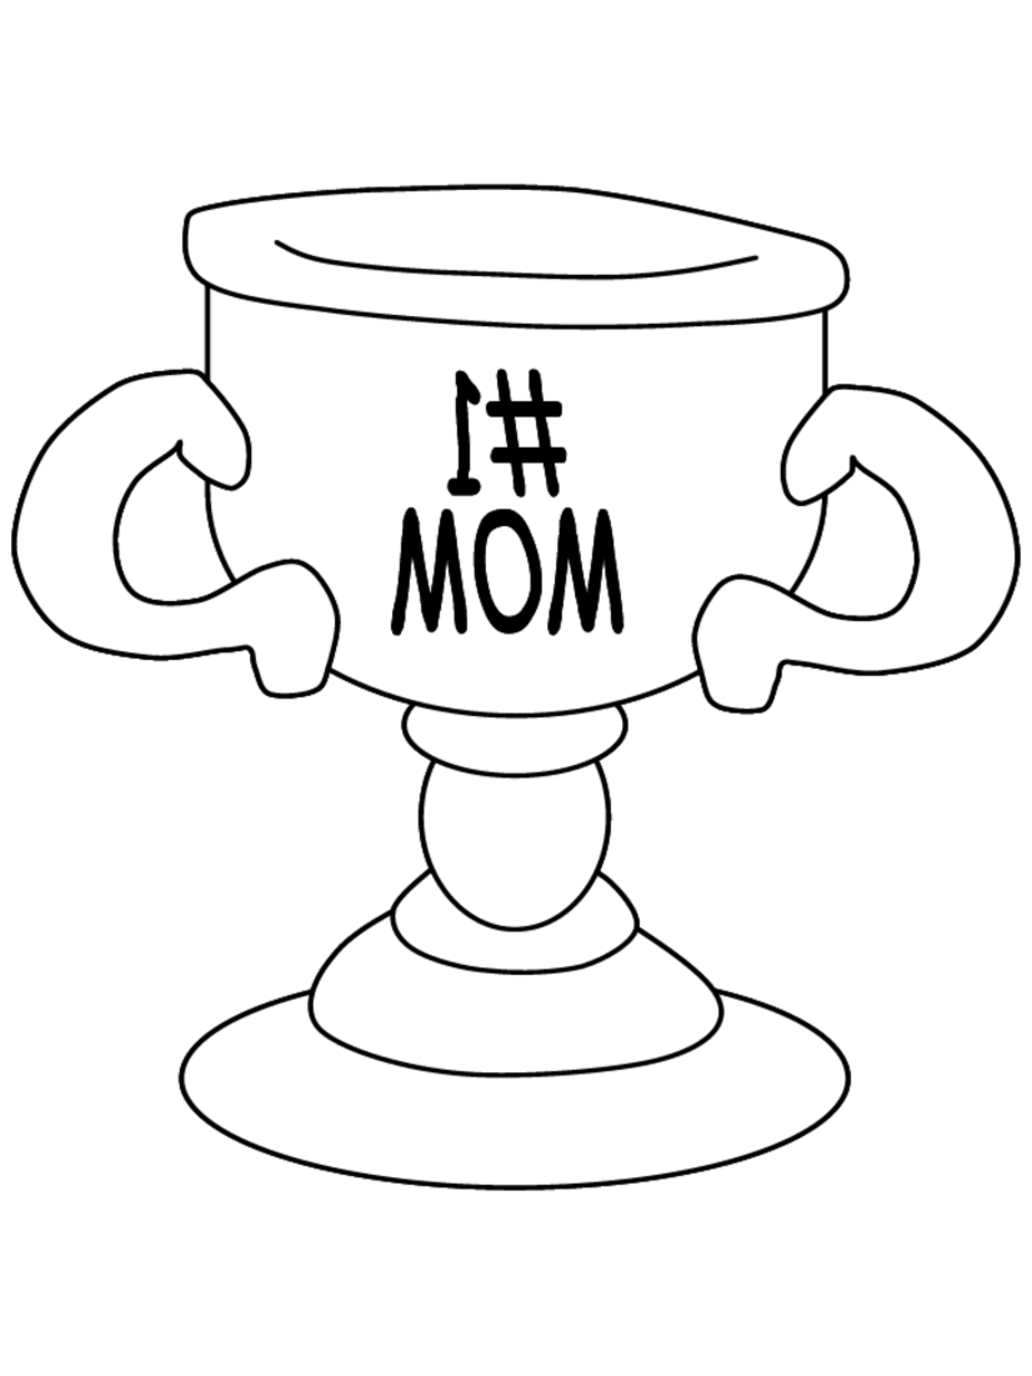 Kids Mother's Day Drawing in EPS, Illustrator, JPG, PSD, PNG, PDF, SVG -  Download | Template.net